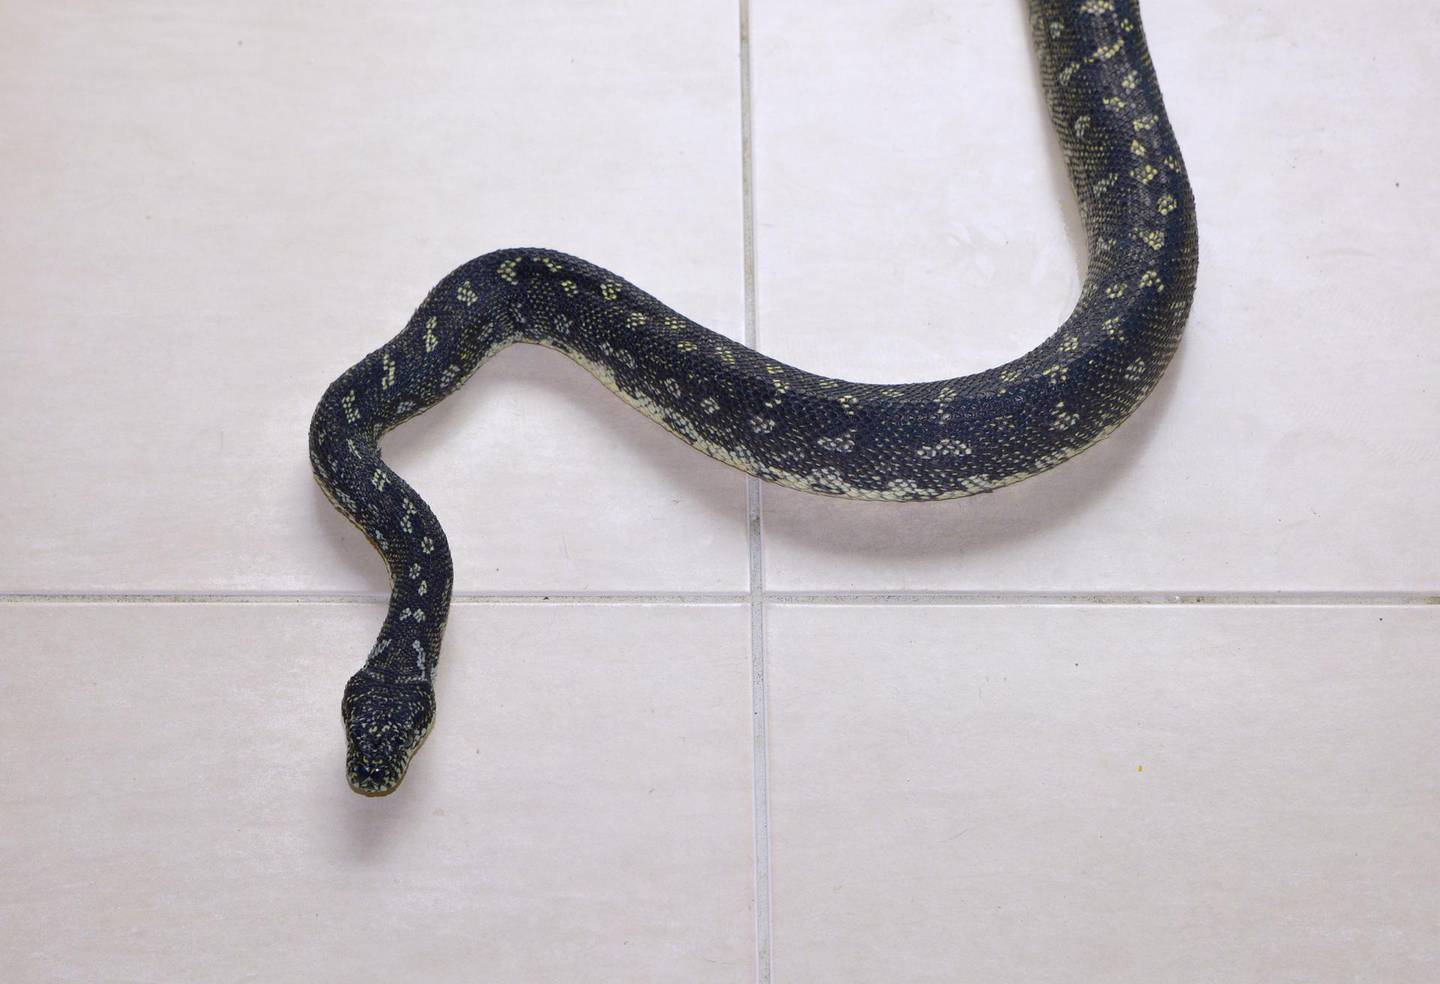 Poisonous snakes are regularly spotted in living spaces, which makes snake catchers such as Mark Pelley and Harley Jones vital to the community. Photo by Ronan O’Connell